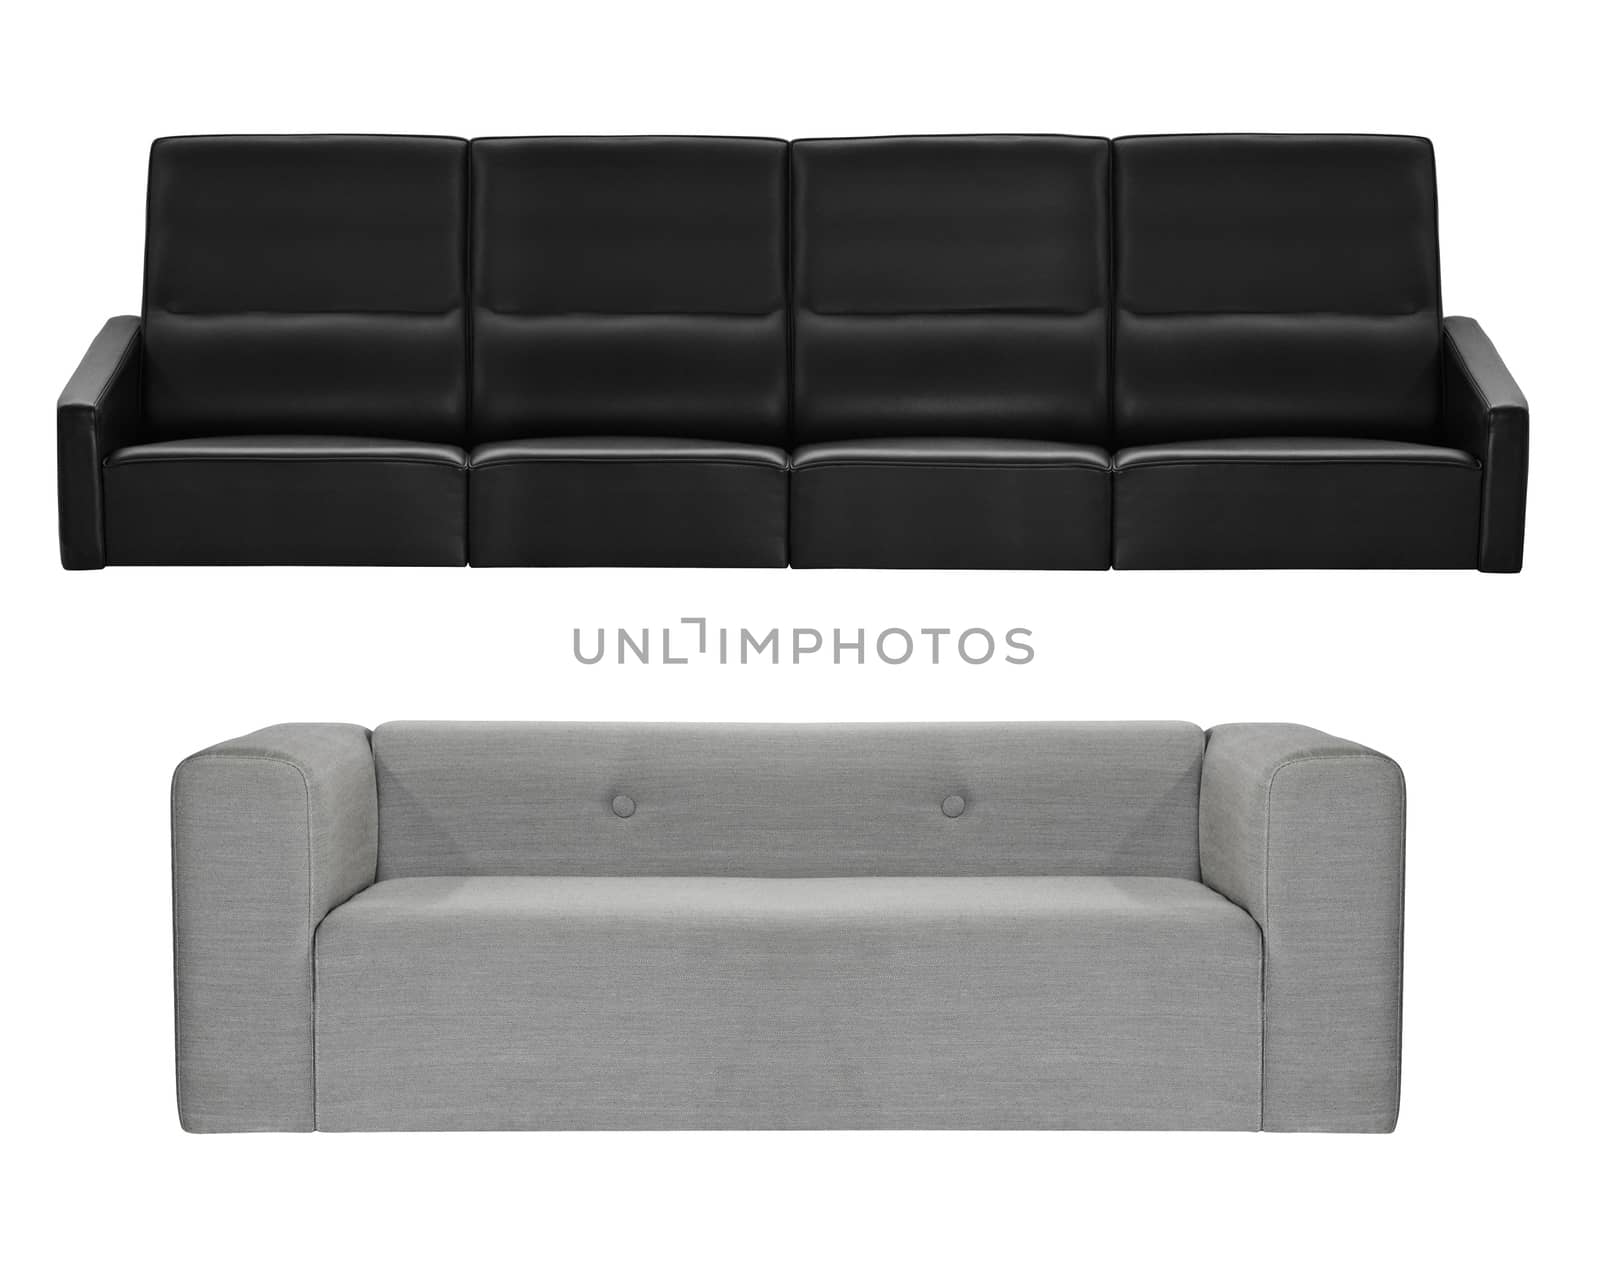 grey and black modern sofa isolated by ozaiachin